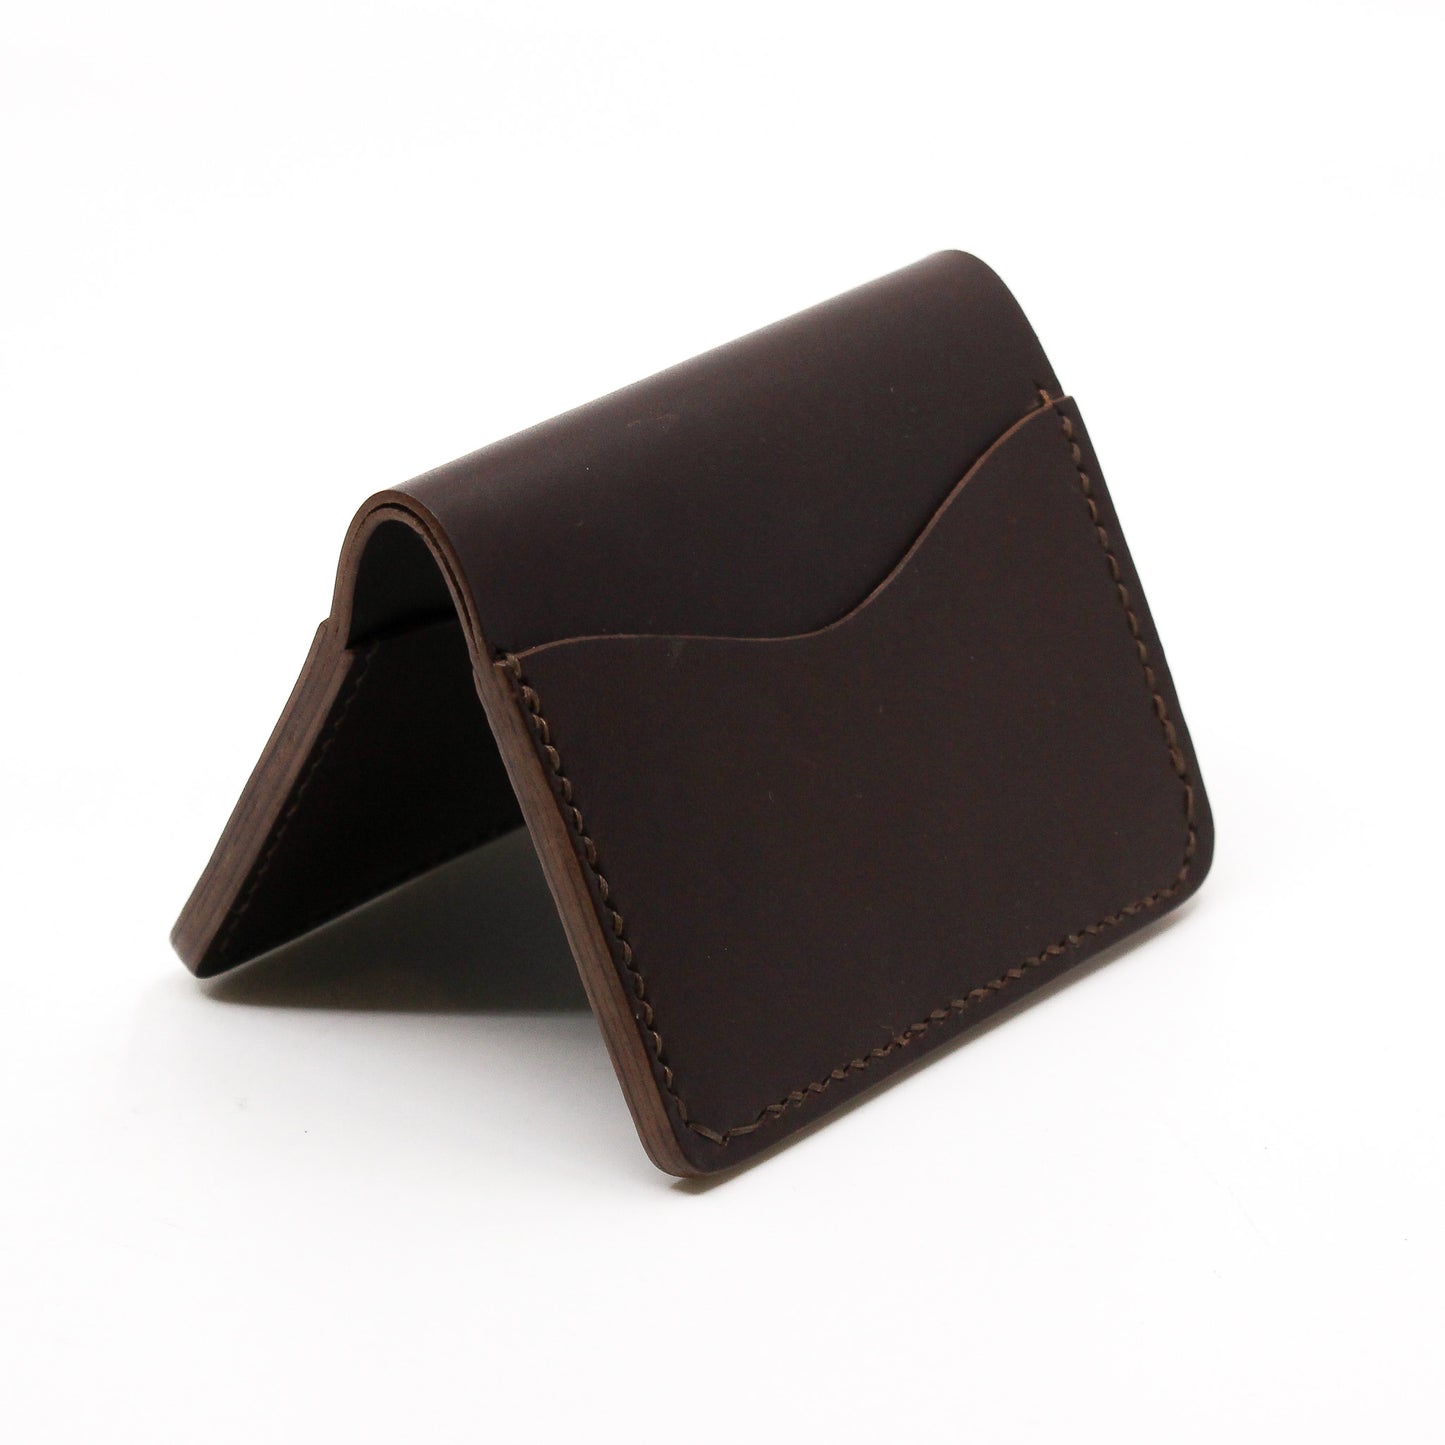 Bifold wallet with 4 card slots